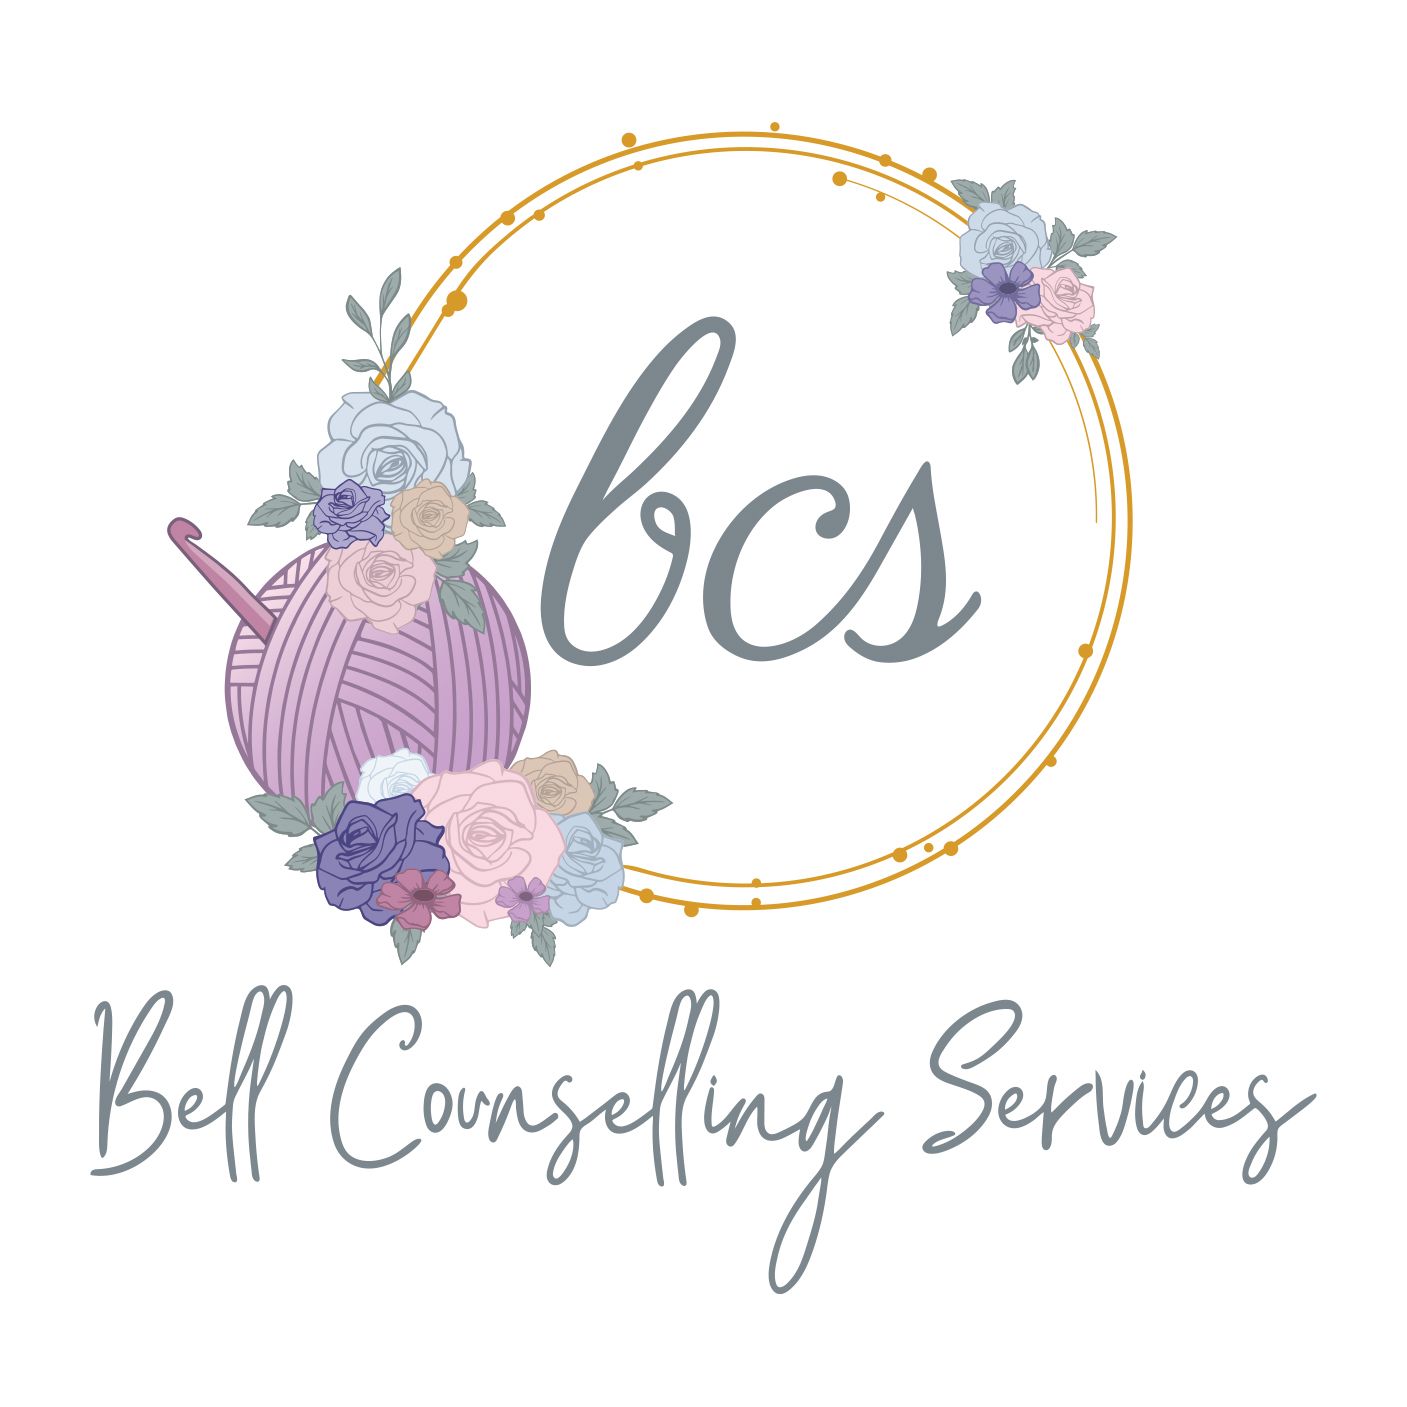 Bell Counselling Services